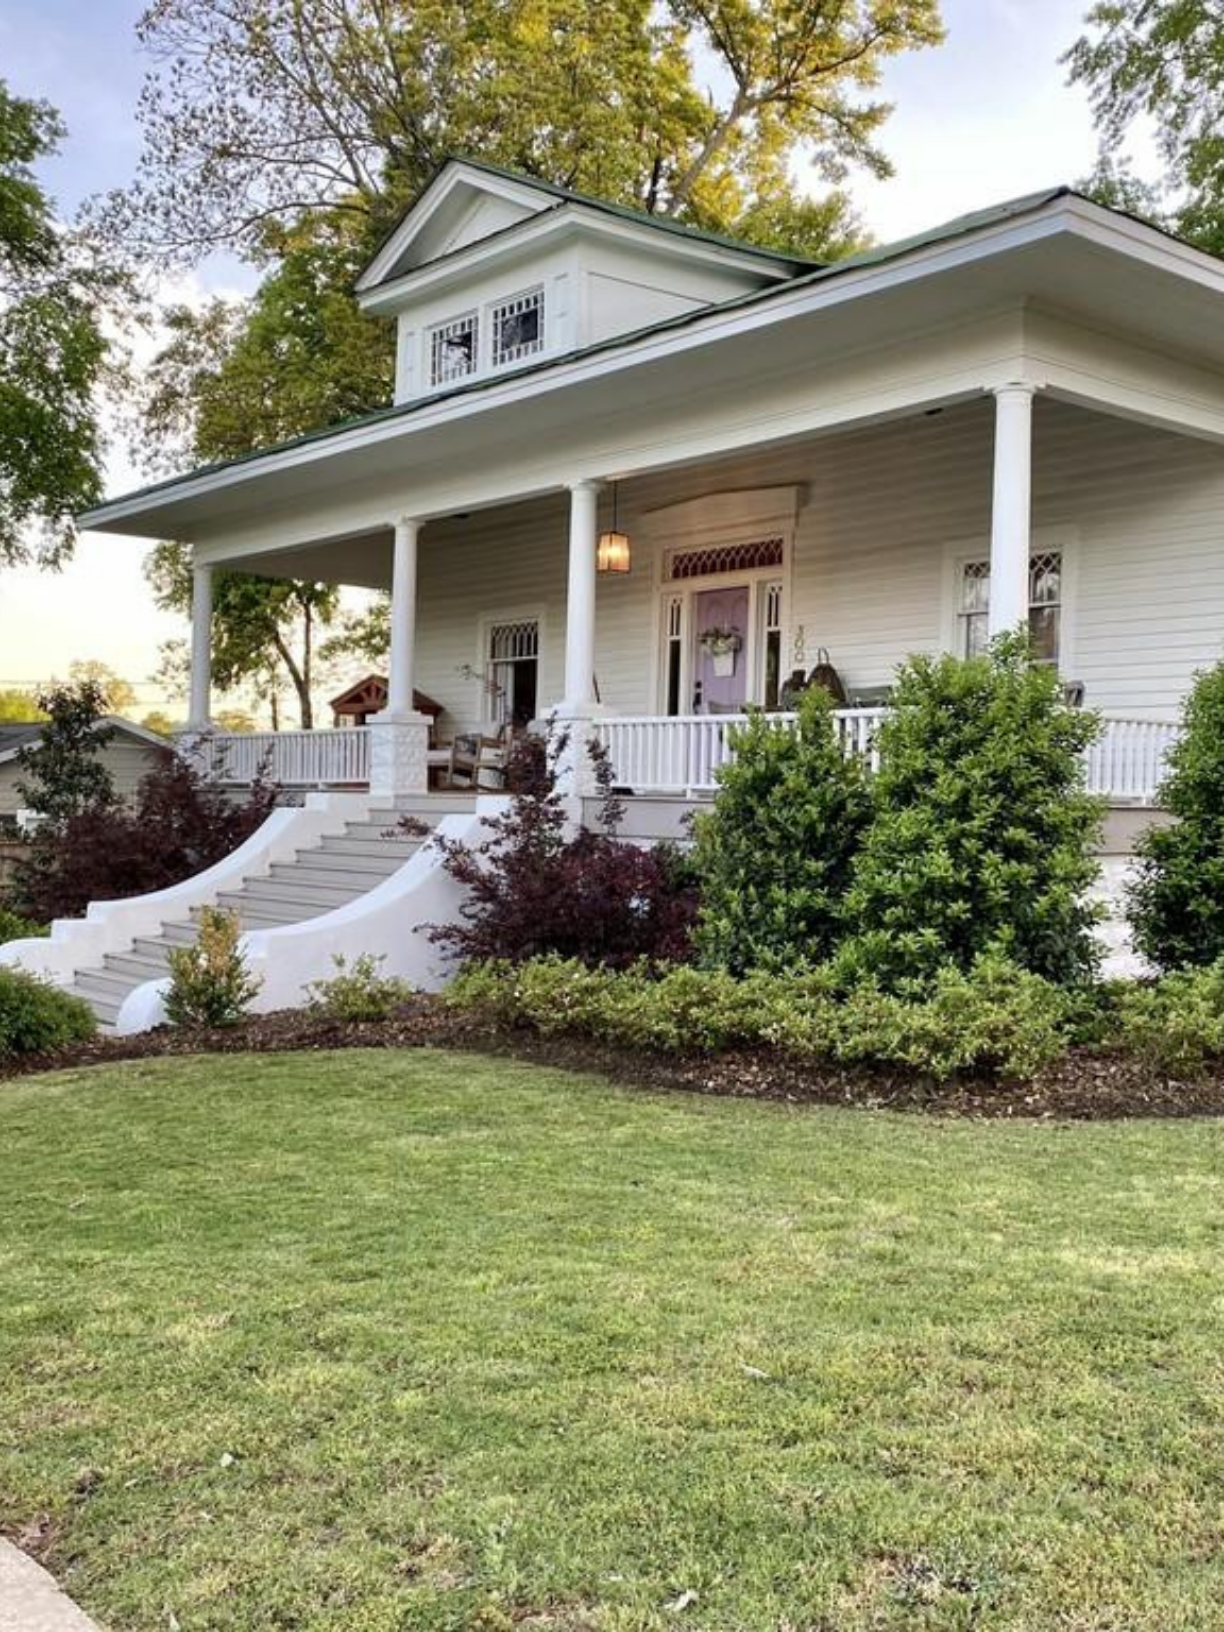 Move to Mississippi! Own an 1870 HGTV Renovated Home